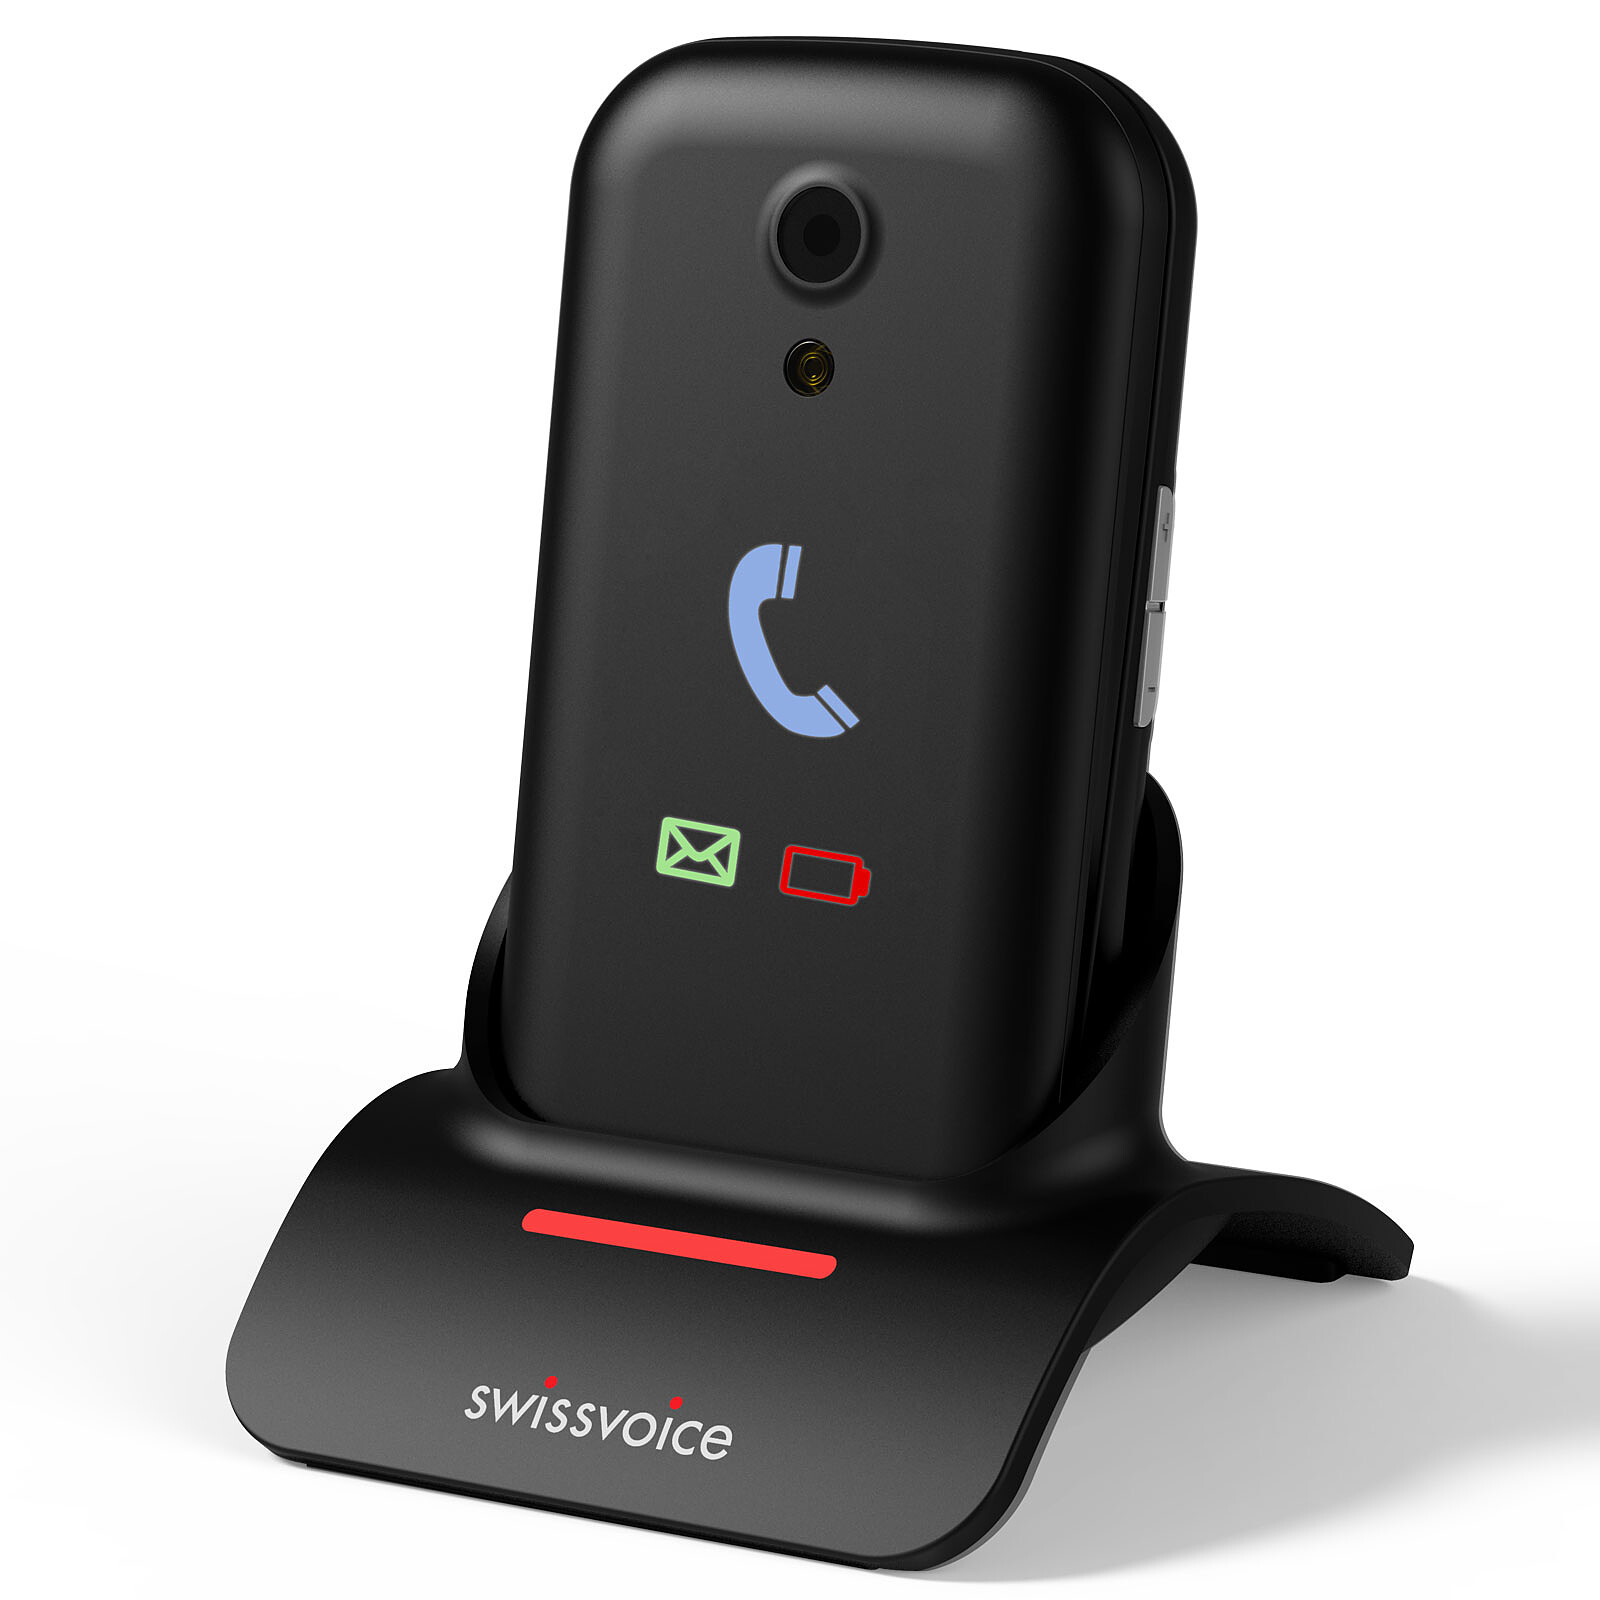 Swissvoice a cool new way to connect with Bluetooth to your mobile